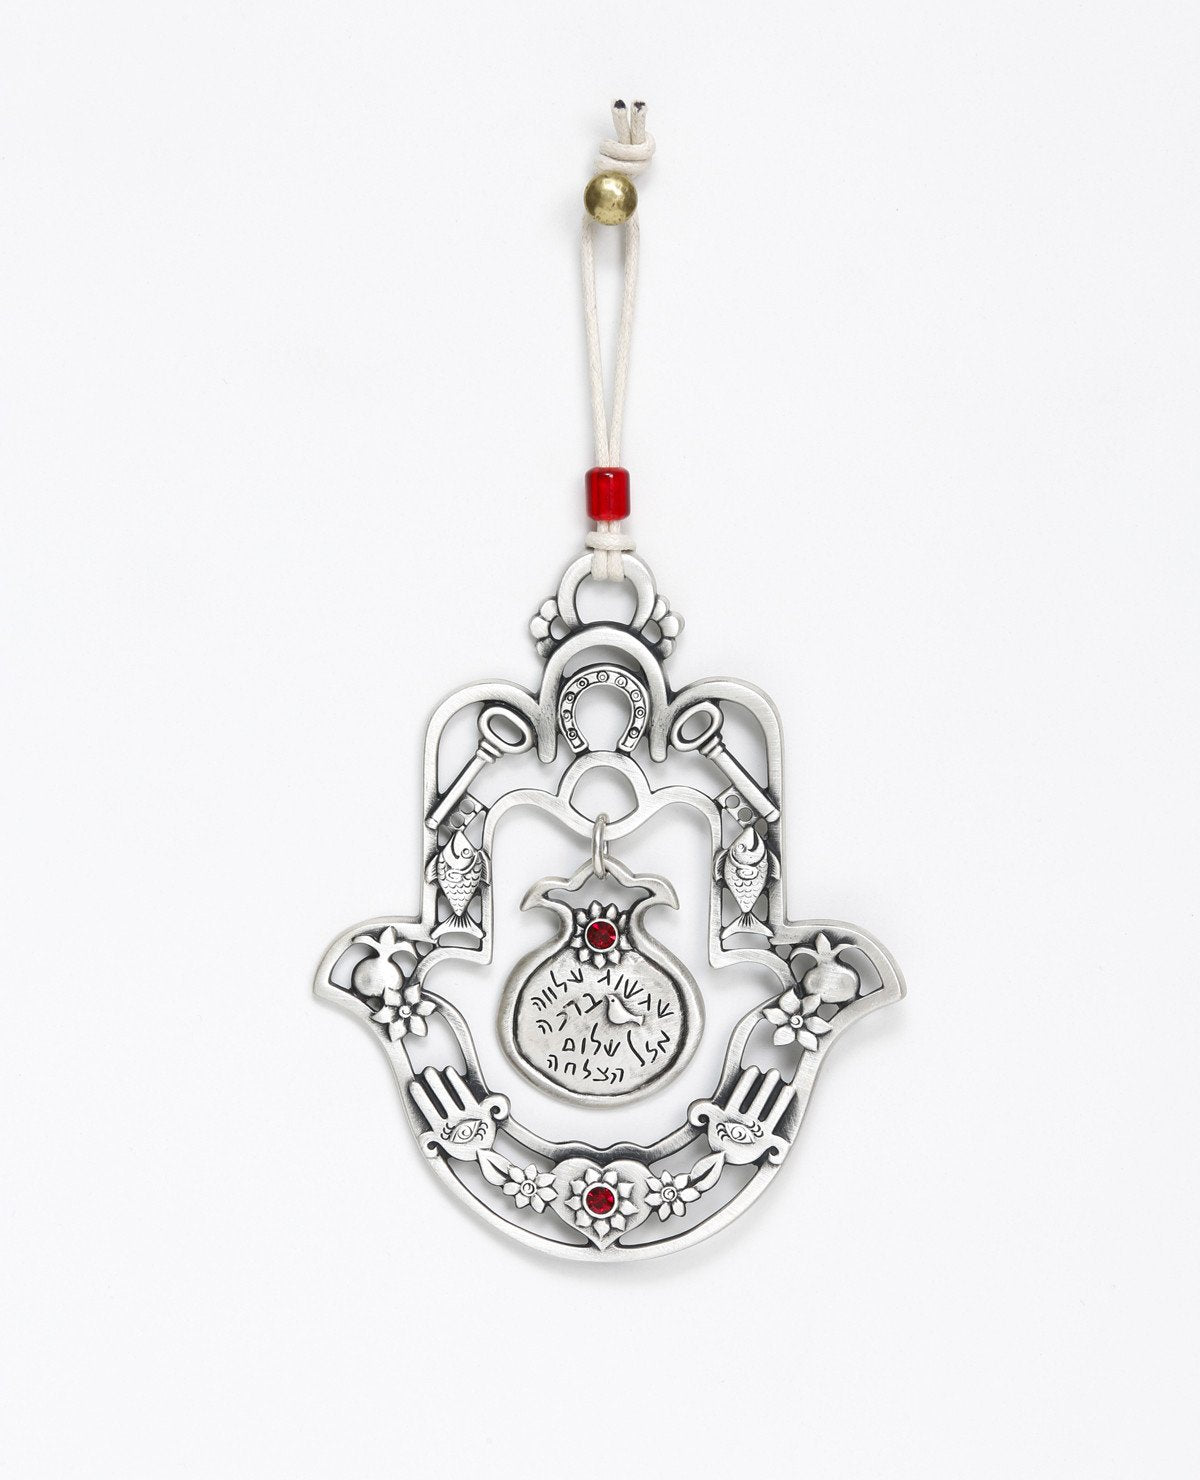 A hanging Hamsa ornament with a delicate filigree like design and a hollow pomegranate hanging at its center. The Hamsa is decorated at its edges with pairs of motifs from the world of good luck charms and blessings, among them a pomegranate, a flower, a fish and a key. All these face each other to multiply the strength of the blessings. Words that bestow prosperity, serenity, blessings, peace and success are written on the pomegranate which hangs from the center of the Hamsa. The ornament is coated in ster